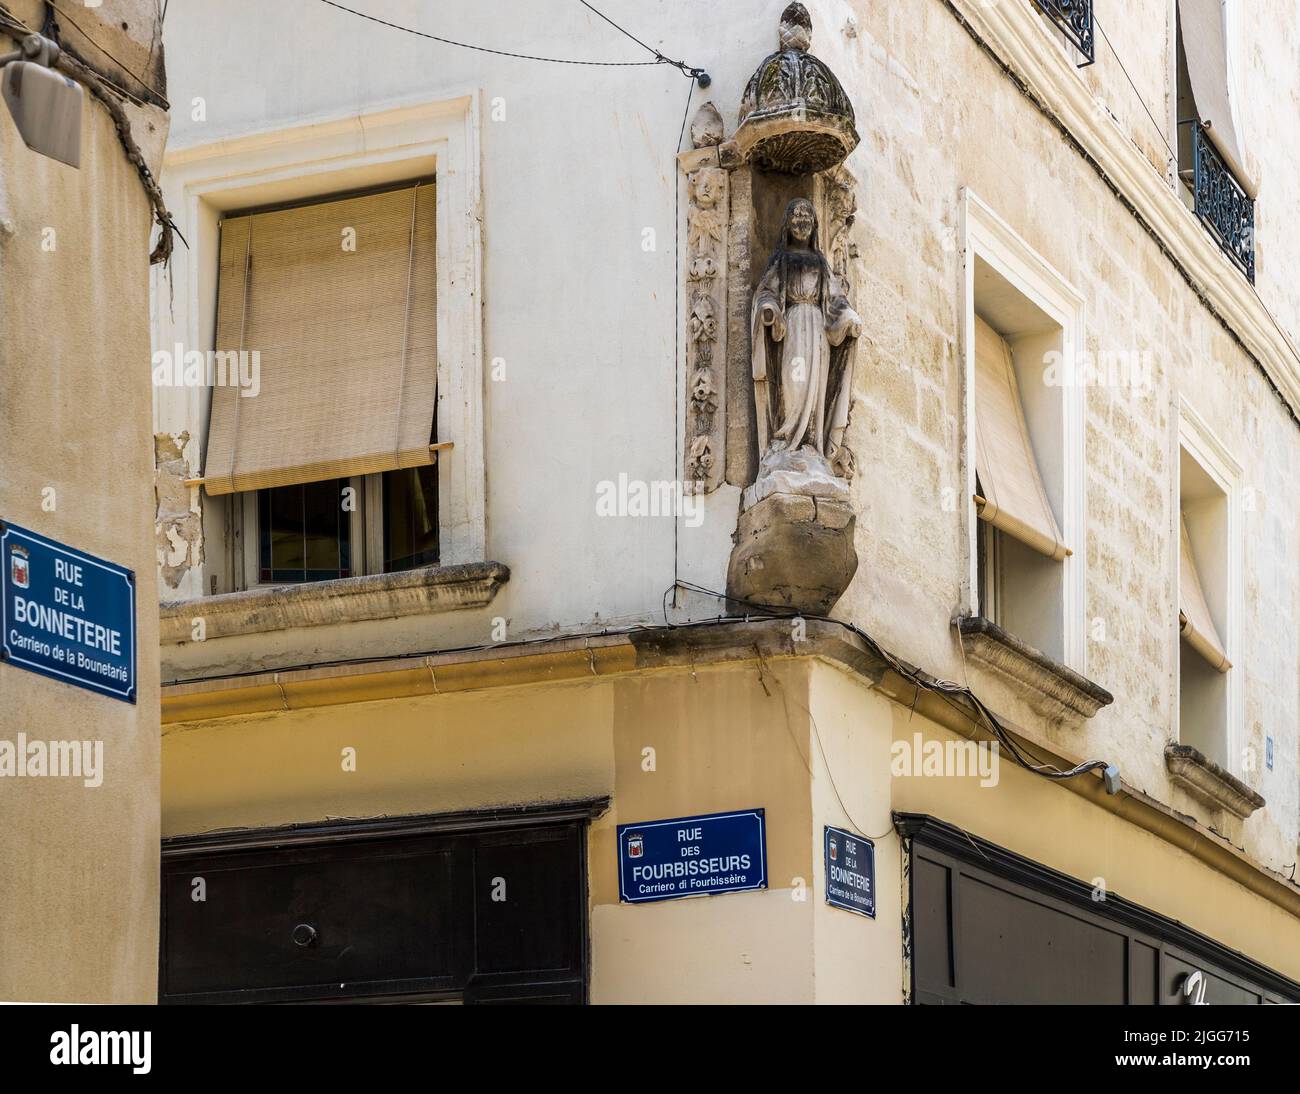 Typical for Avignon are the Madonna figures on many house facades. Avignon, France Stock Photo